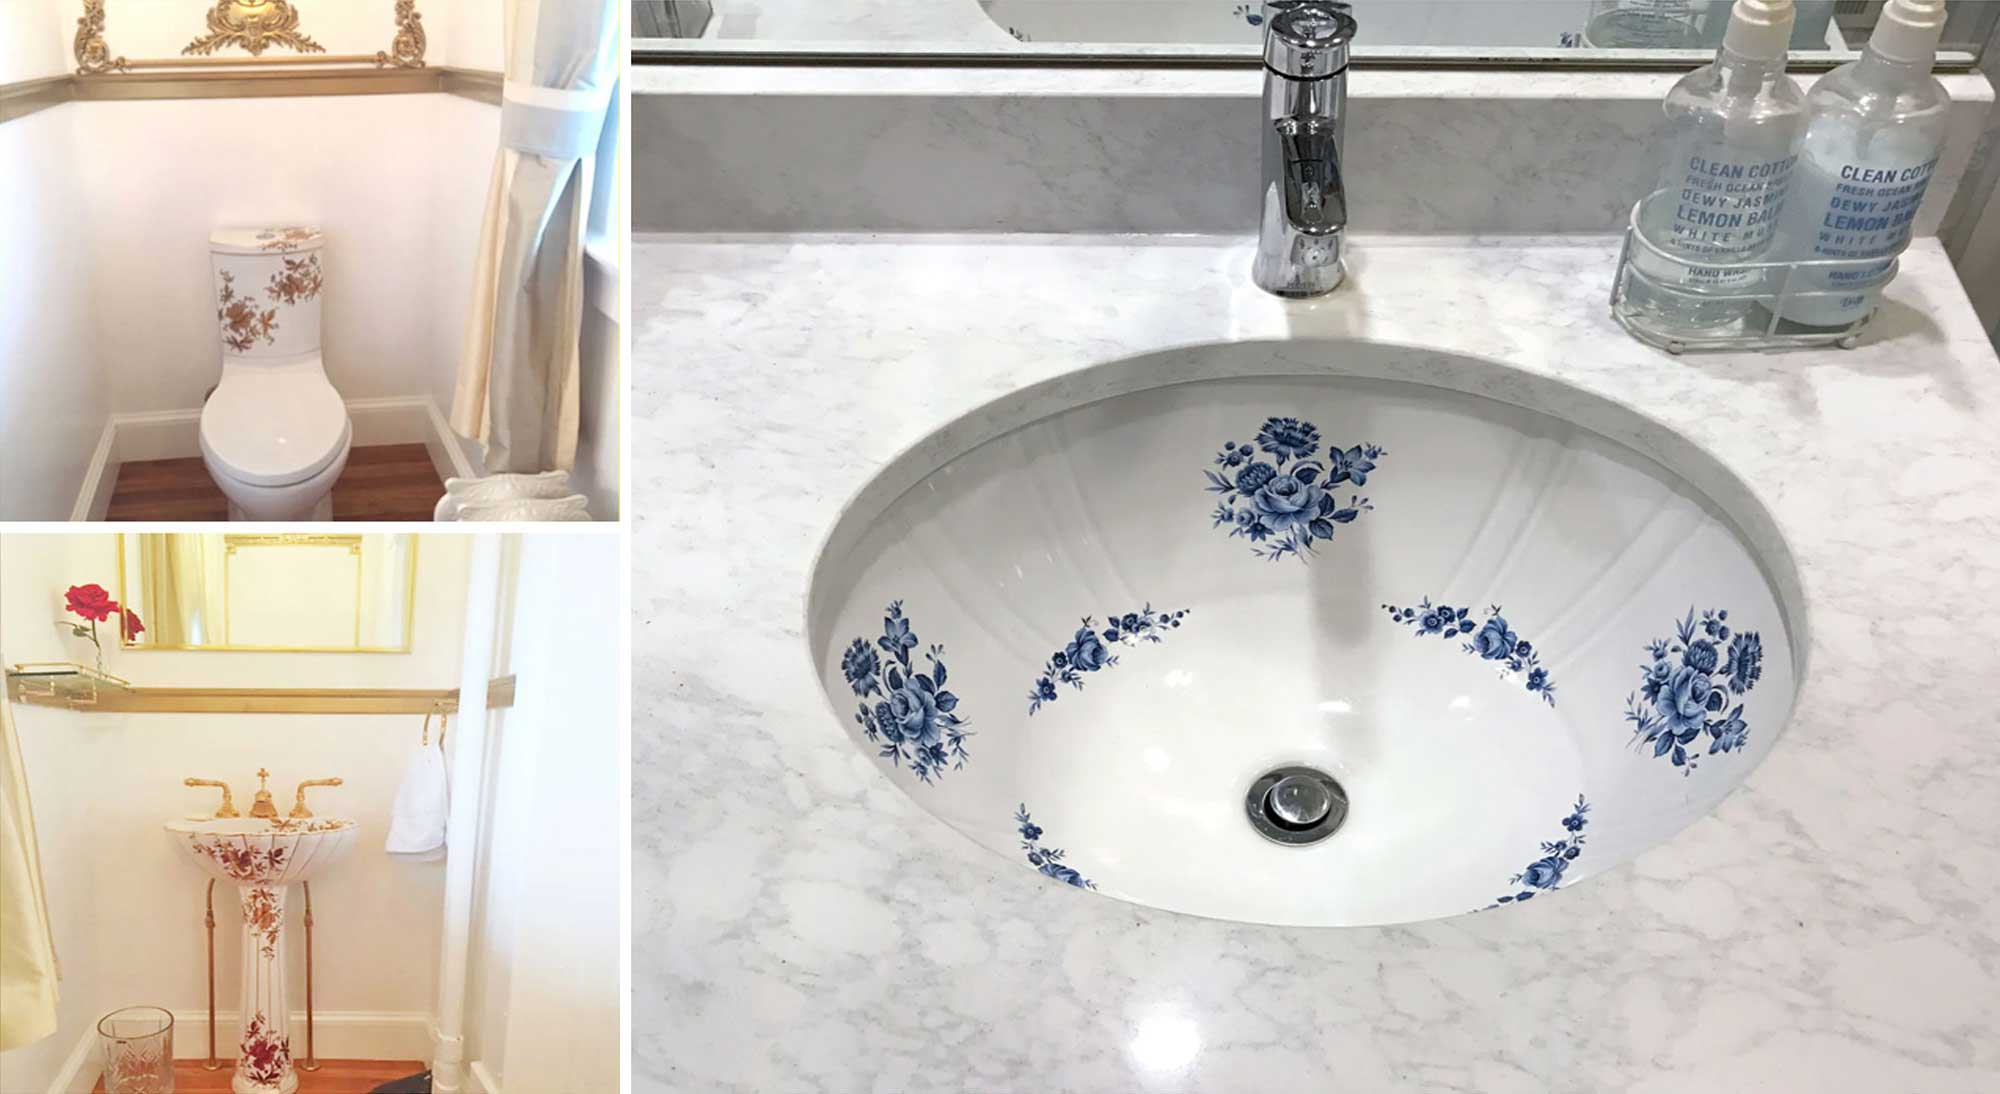 great bathroom decoration ideas with hand painted blue roses sink, white marble counter and powder room with gold orchids painted sink and Kohler toilet